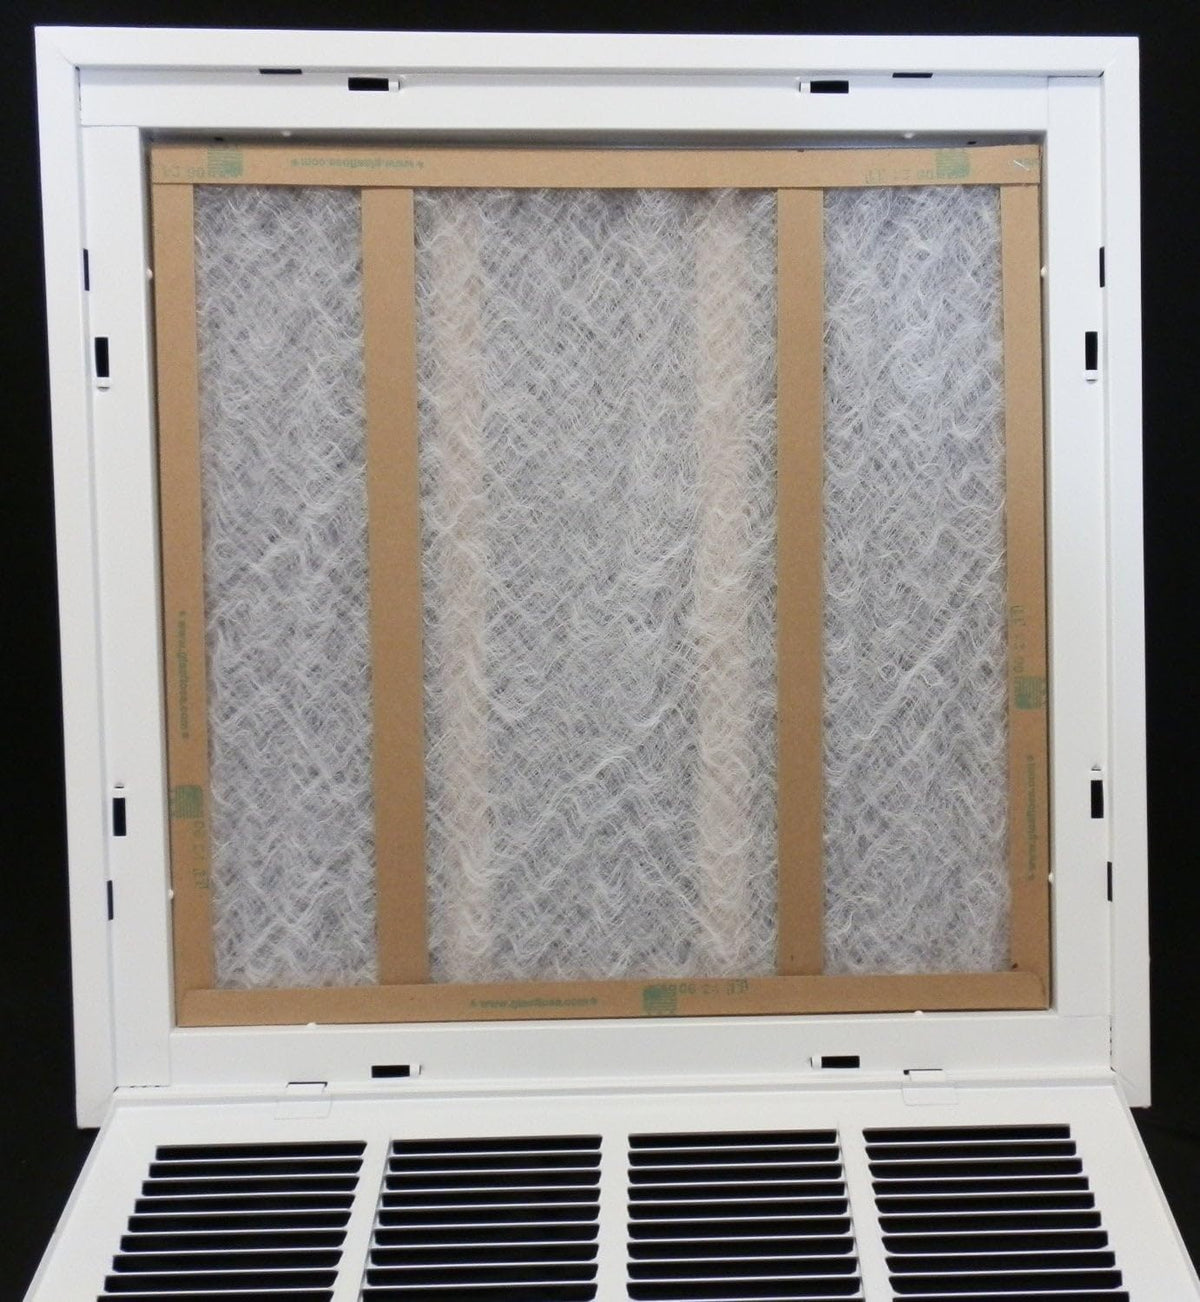 30&quot; X 30&quot; Steel Return Air Filter Grille for 1&quot; Filter - Fixed Hinged- [Outer Dimensions: 32 5/8&quot; X 32 5/8&quot;]